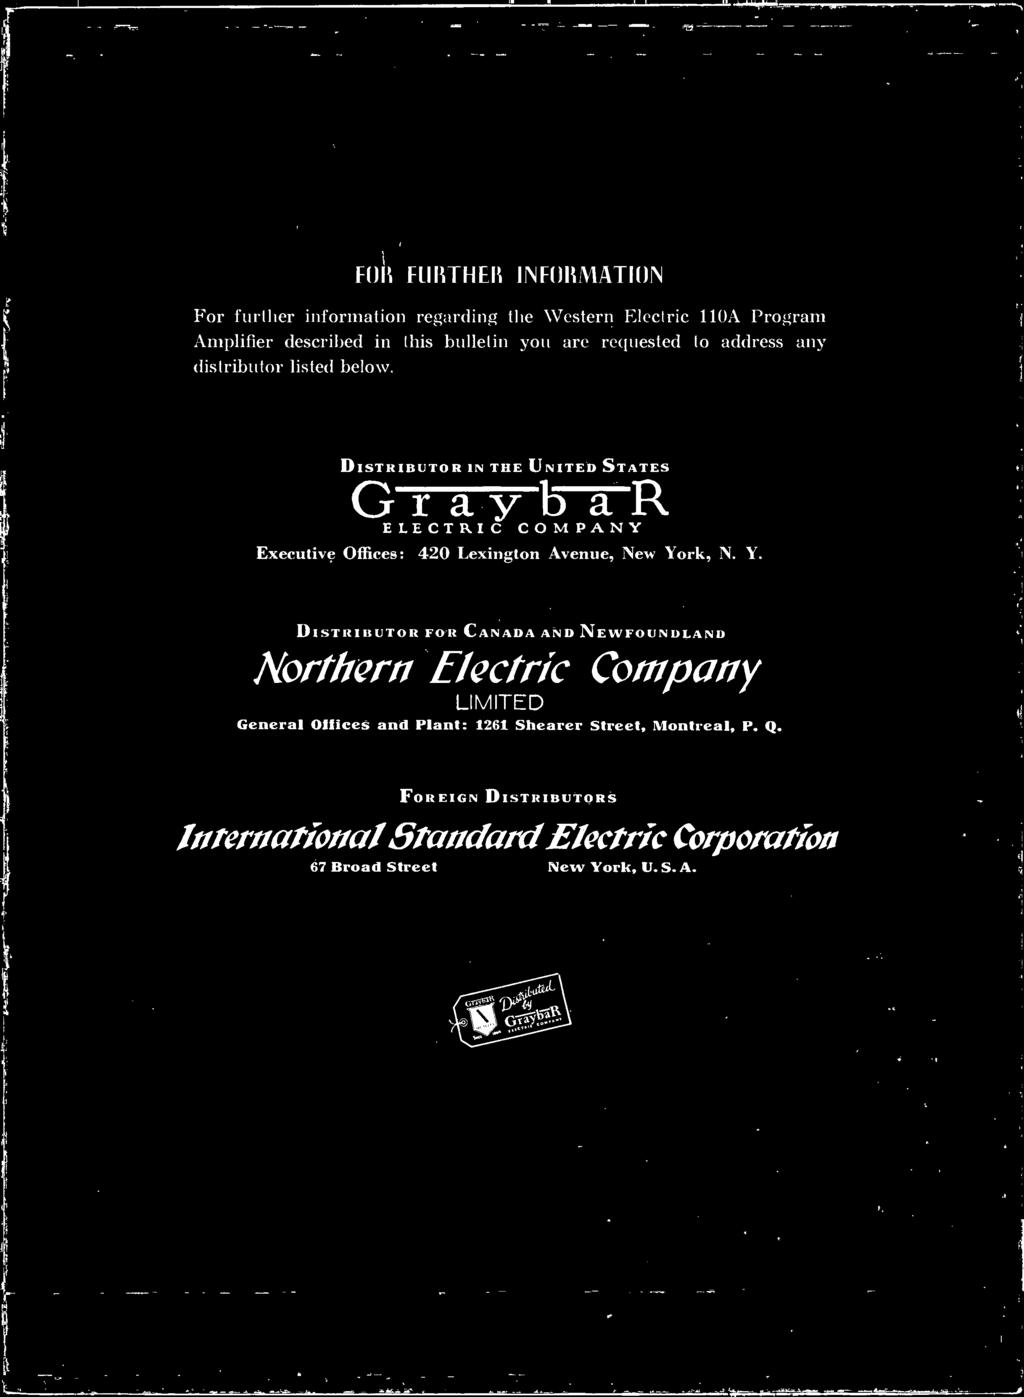 DISTRIBUTOR GraybaR 1N THE UNITED STATES ELECTRIC COMPANY Executive Offices: 420 Lexington Avenue, New Yo